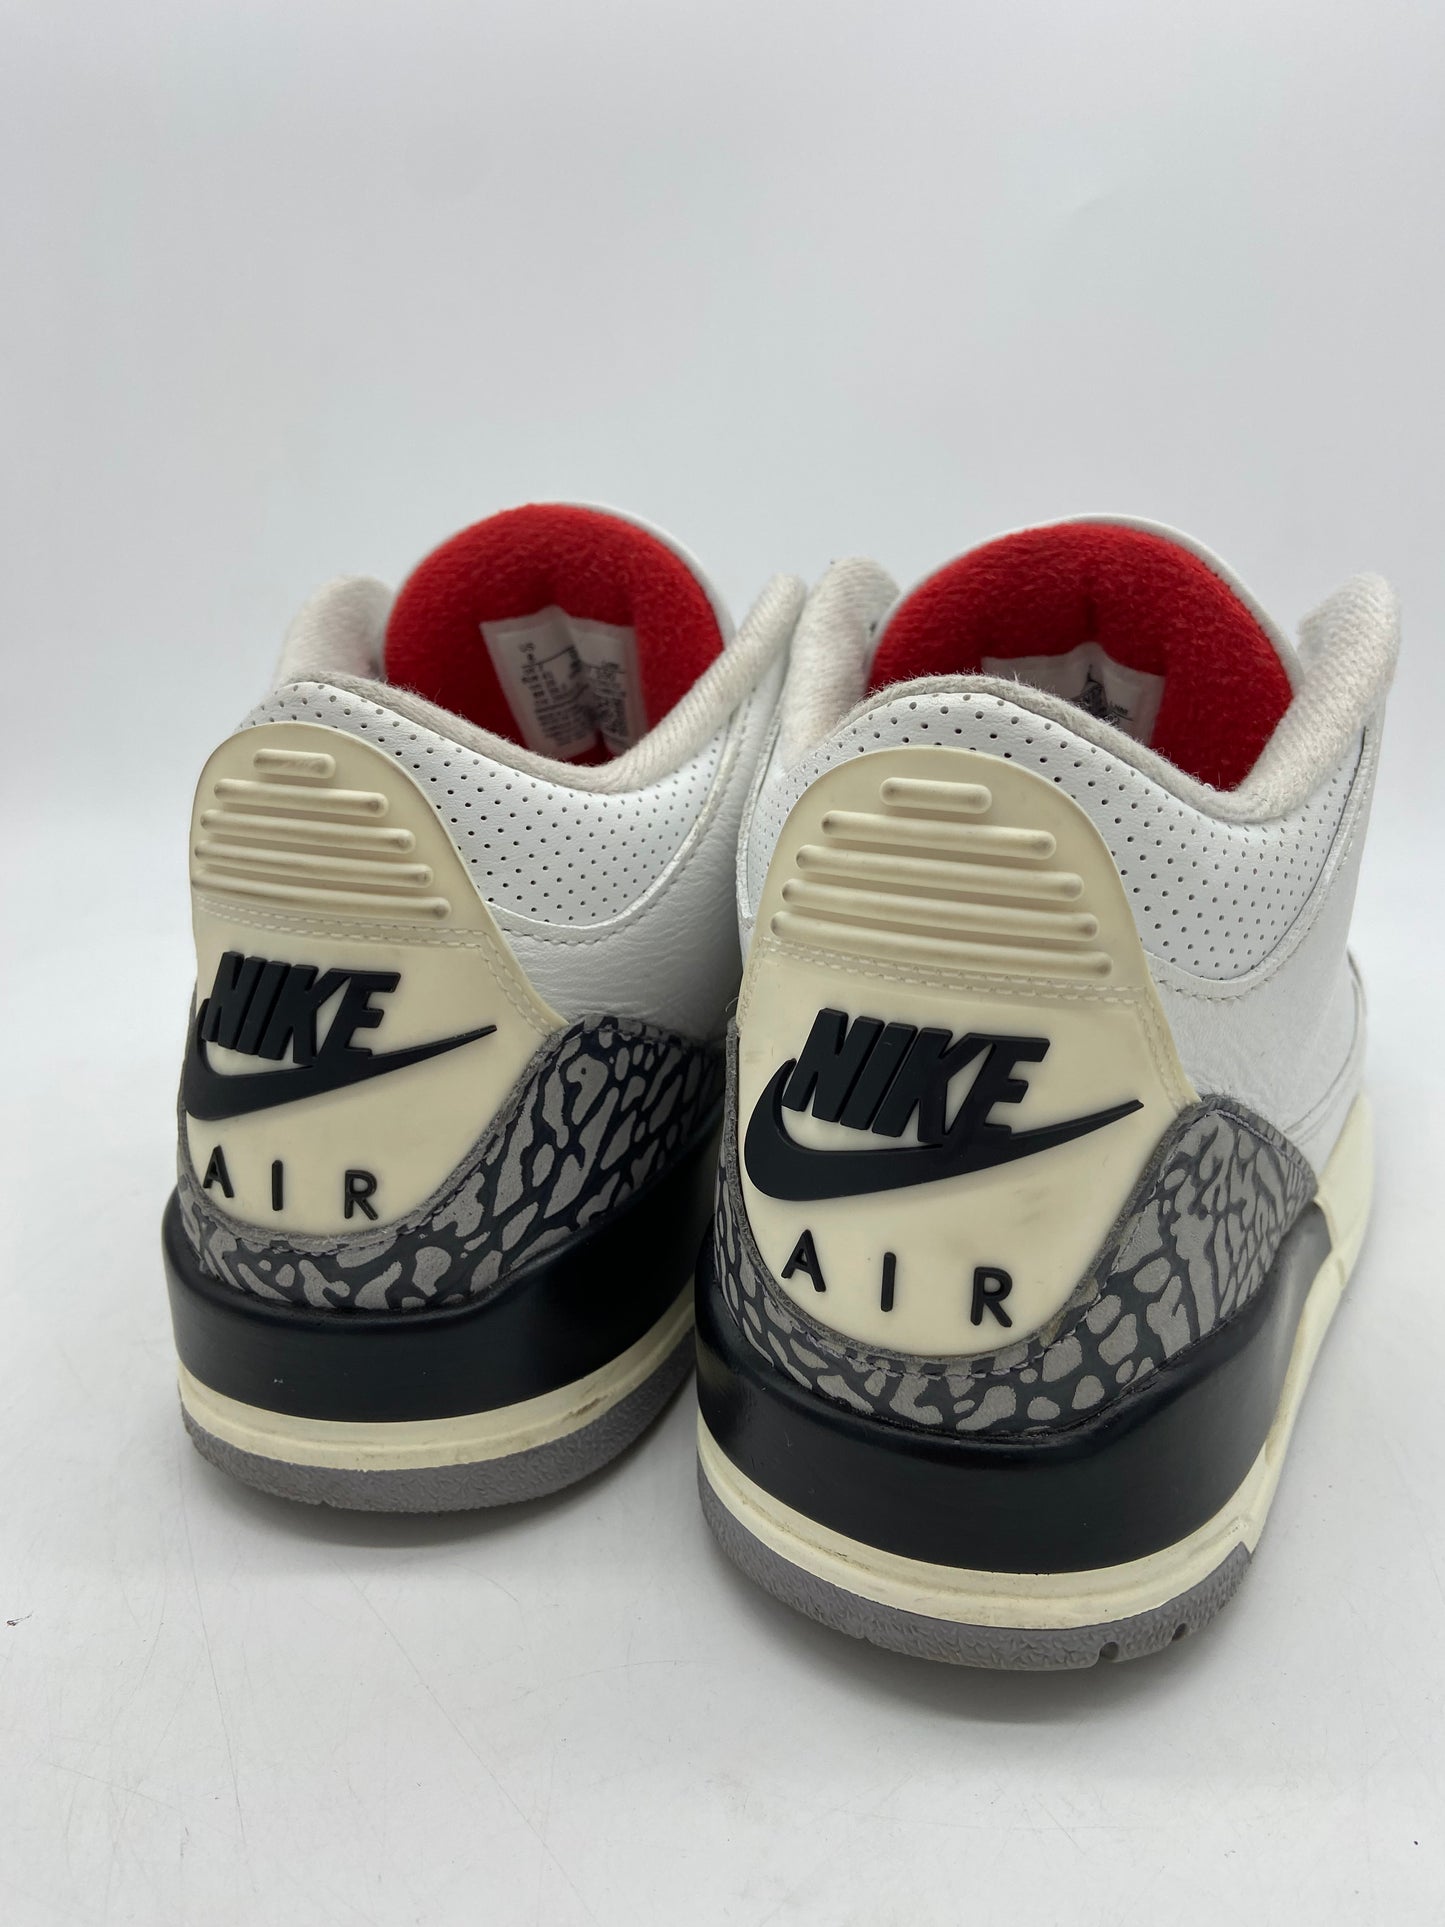 Load image into Gallery viewer, Jordan 3 Retro White Cement Reimagined Sz 8M/9.5W DN3707-100
